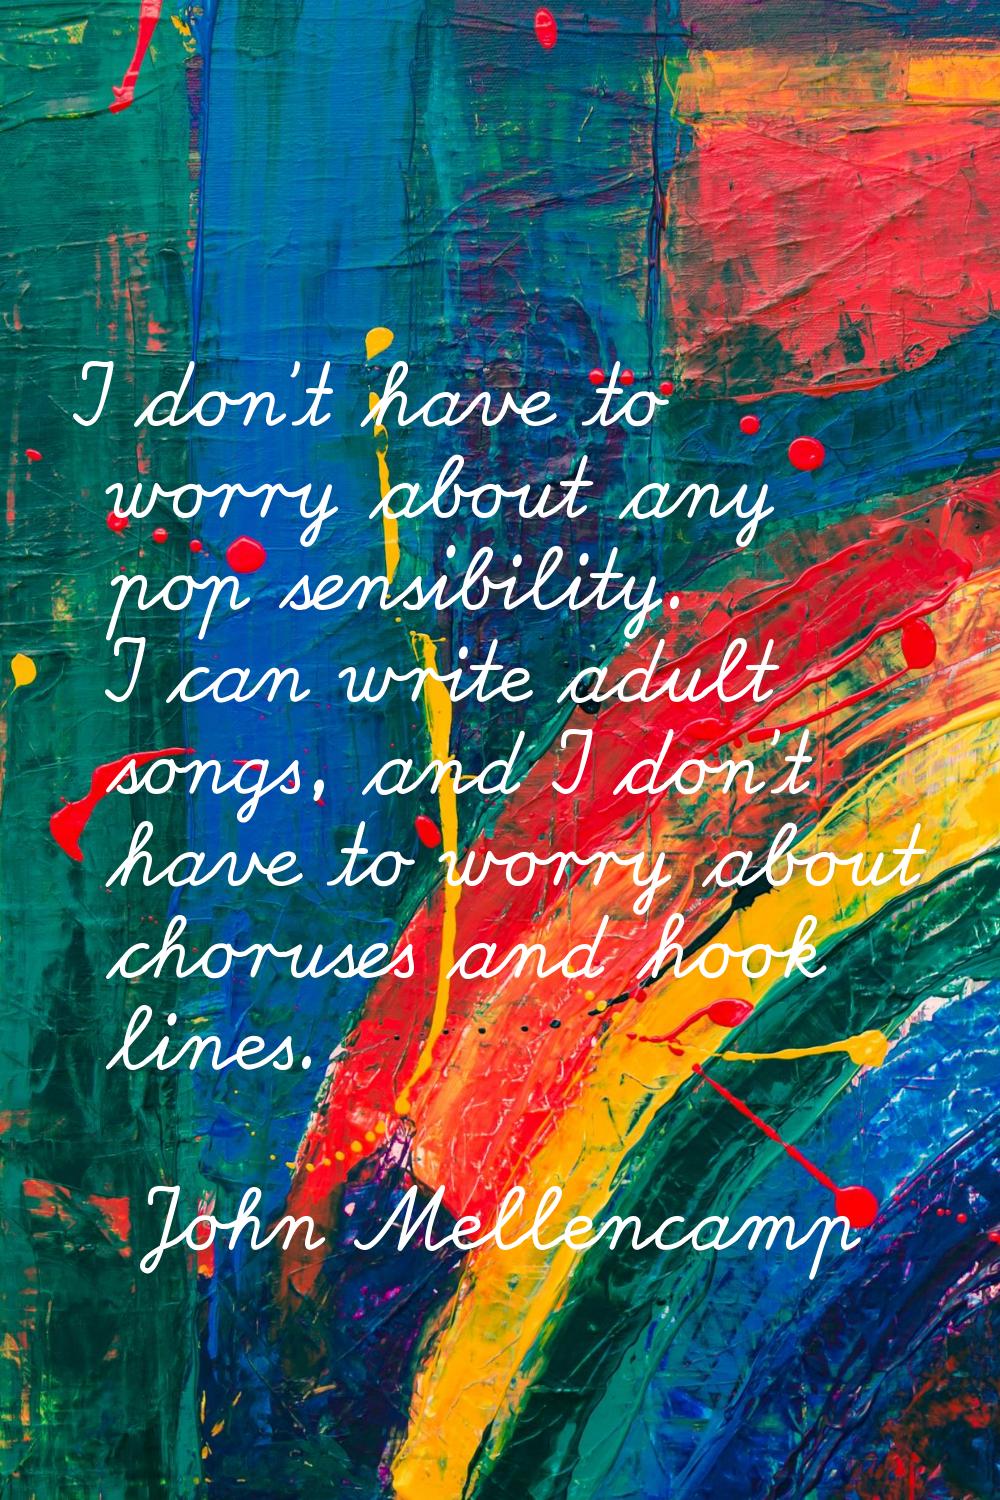 I don't have to worry about any pop sensibility. I can write adult songs, and I don't have to worry